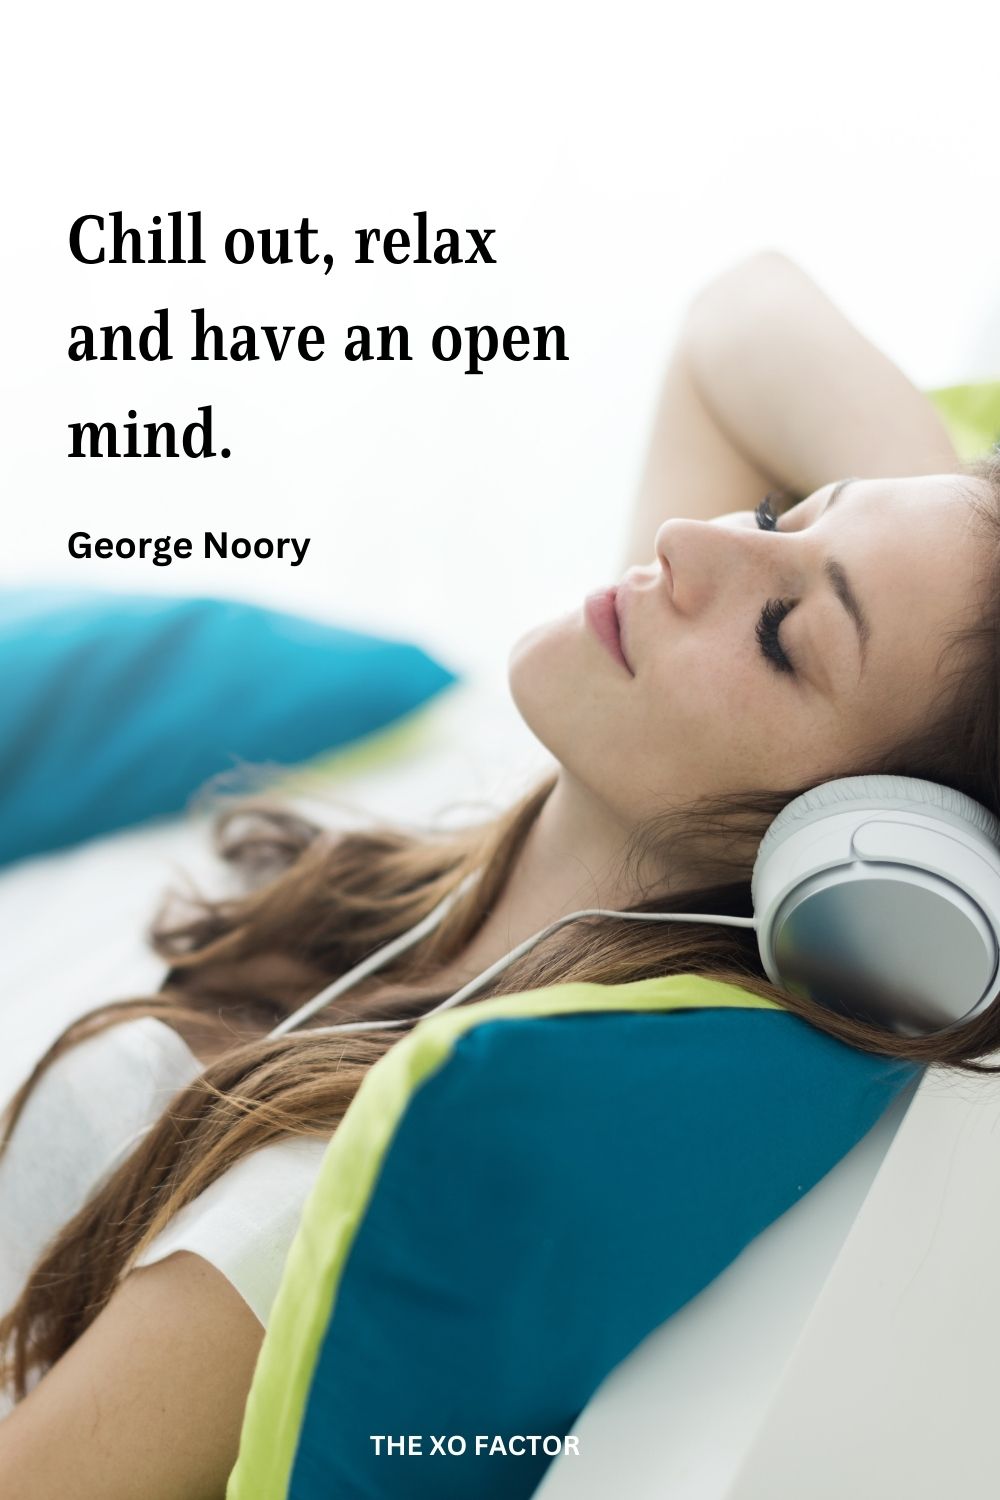 Chill out, relax and have an open mind.
George Noory